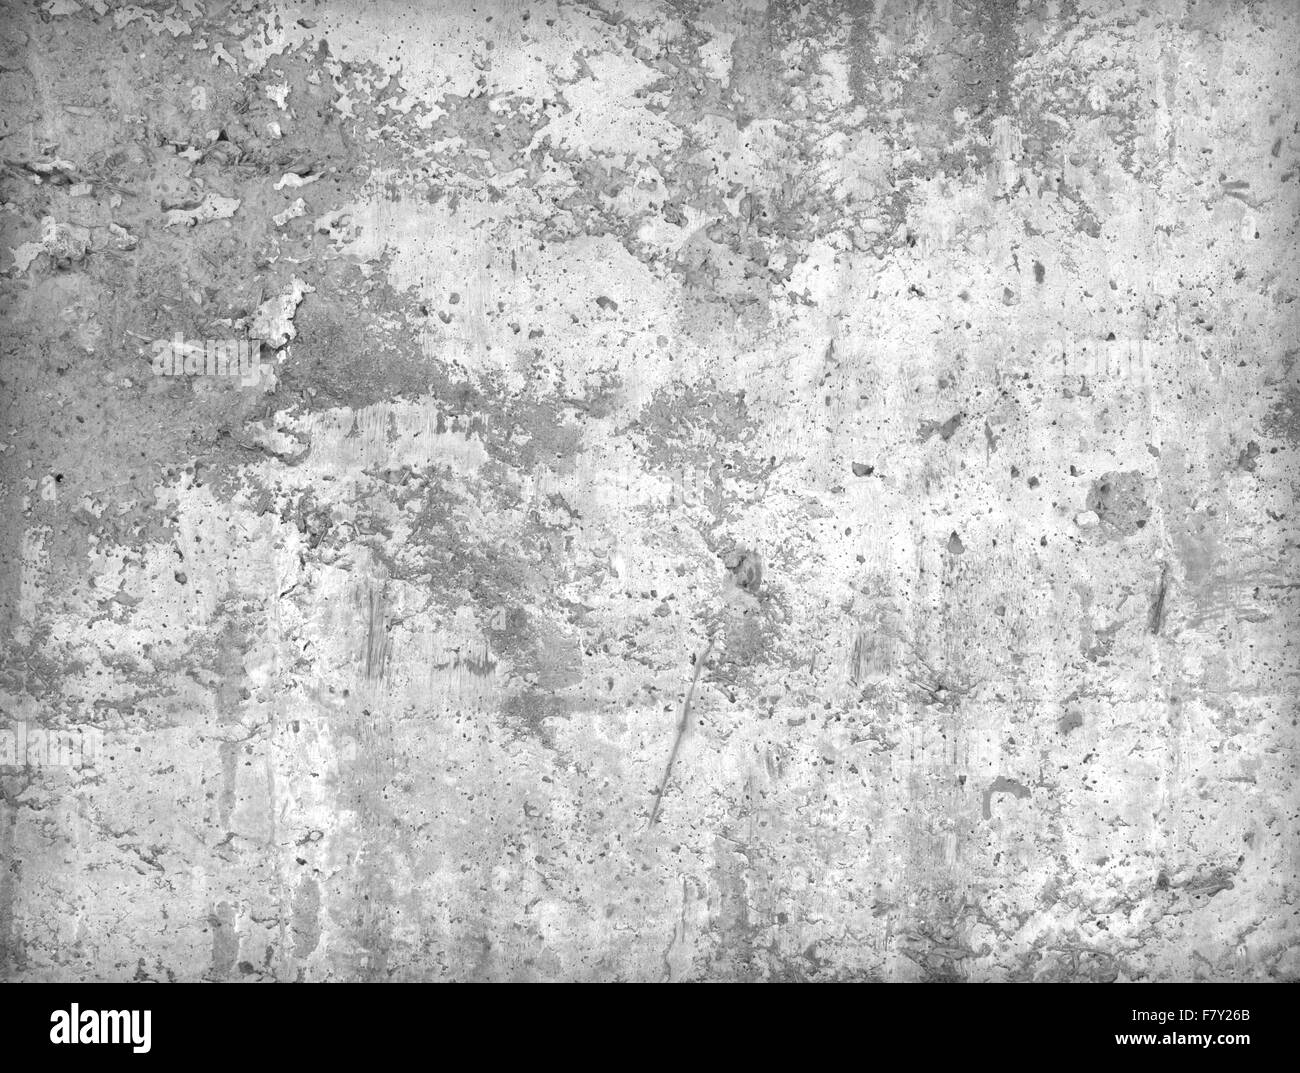 Cement walls weathered durability of the construction industry. Stock Photo